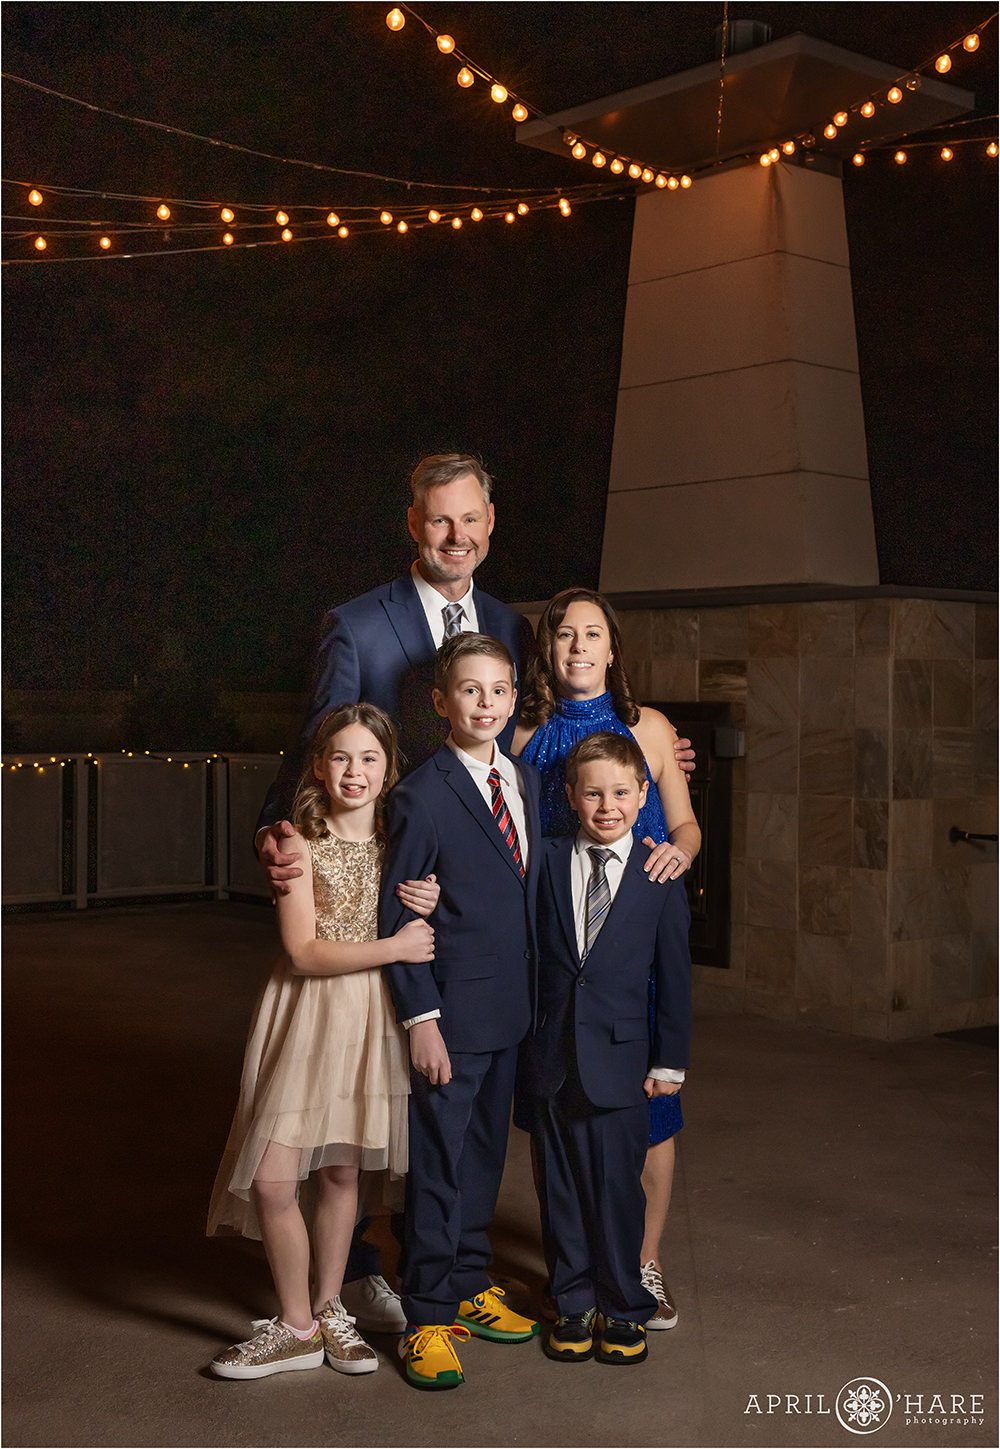 Family portrait on the outdoor patio at Curtis Ballroom at their son's bar mitzvah party